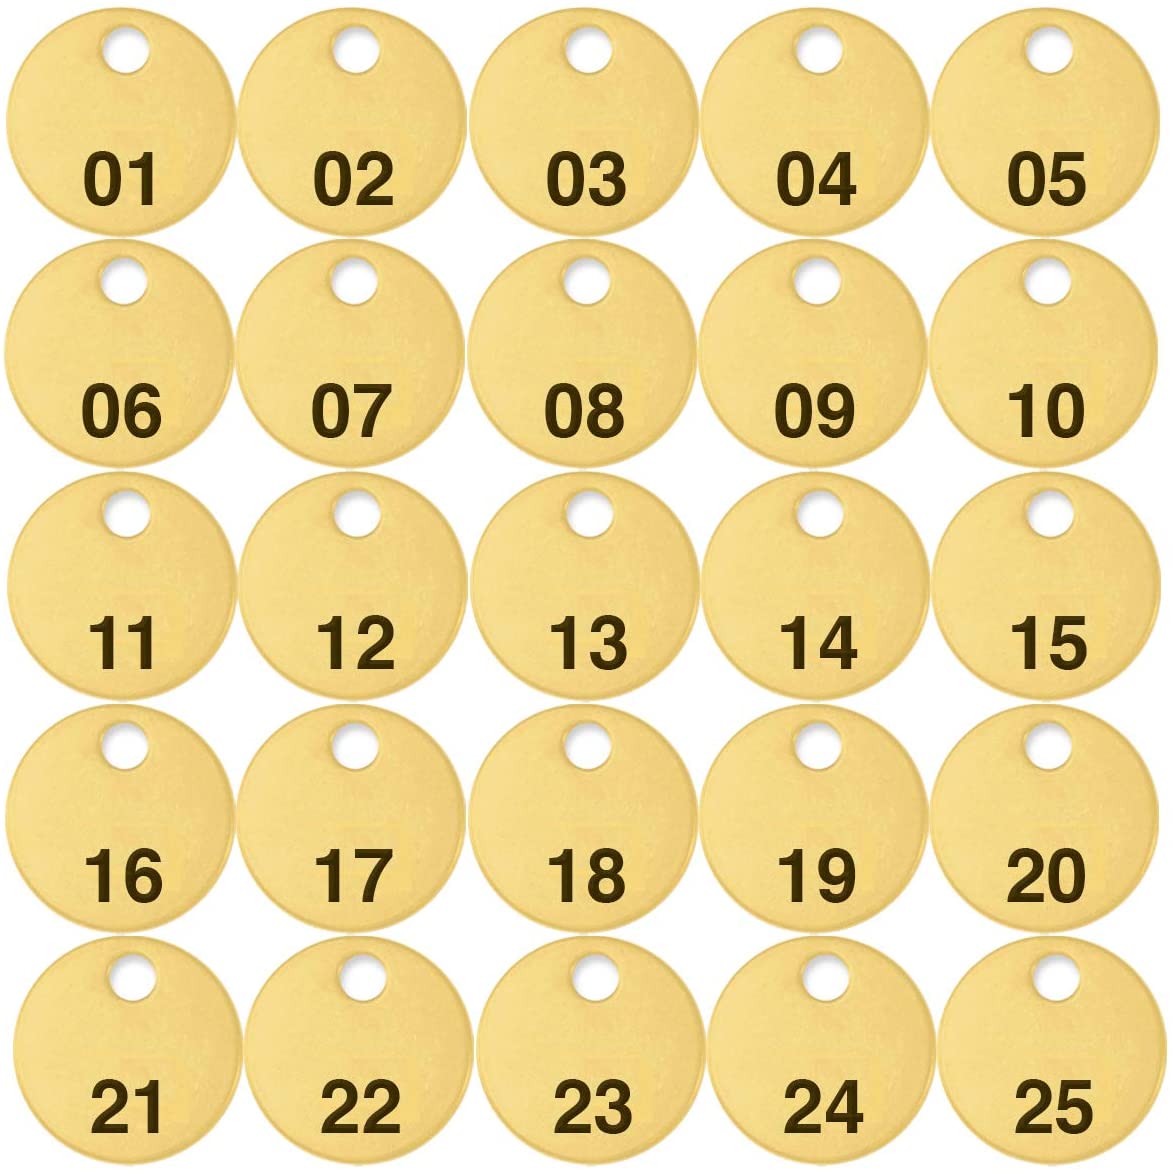 Brass Round Numbered Tags